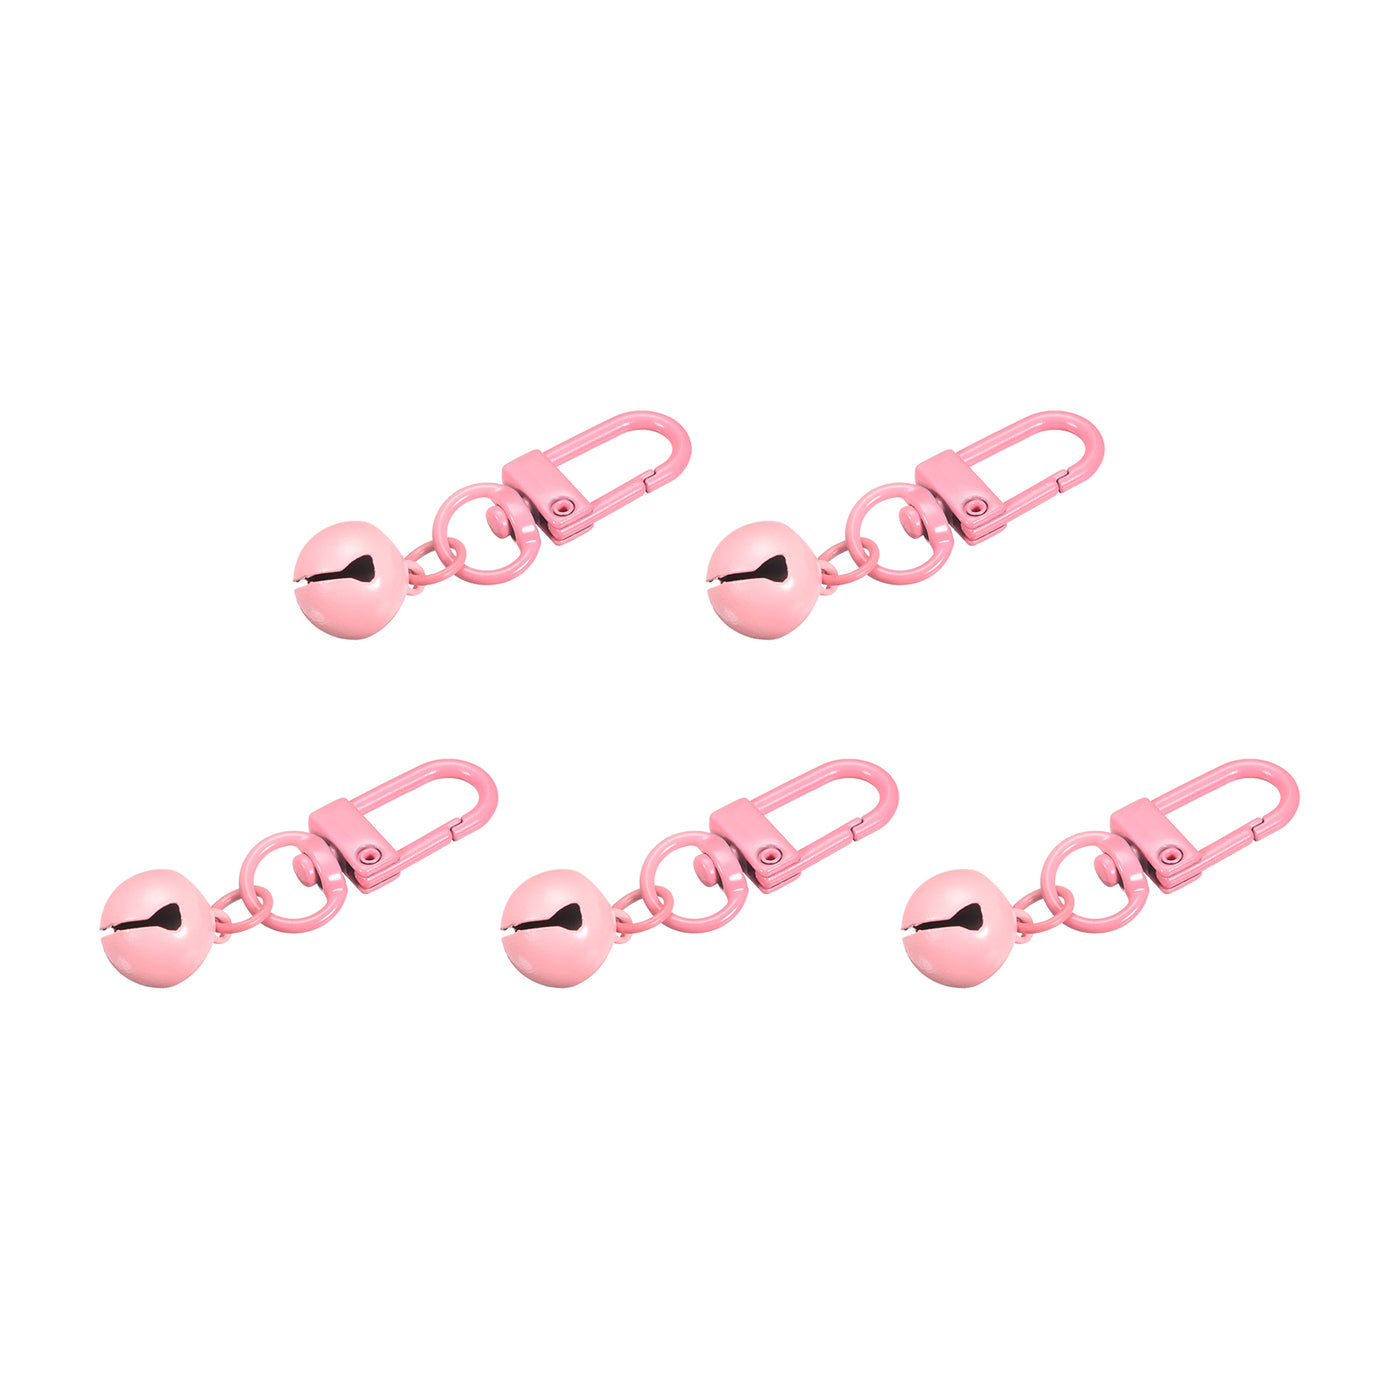 uxcell Uxcell 5Pcs Pet Bells, 13mm/0.51" Dia Pink Bells with Clasps for DIY Crafts